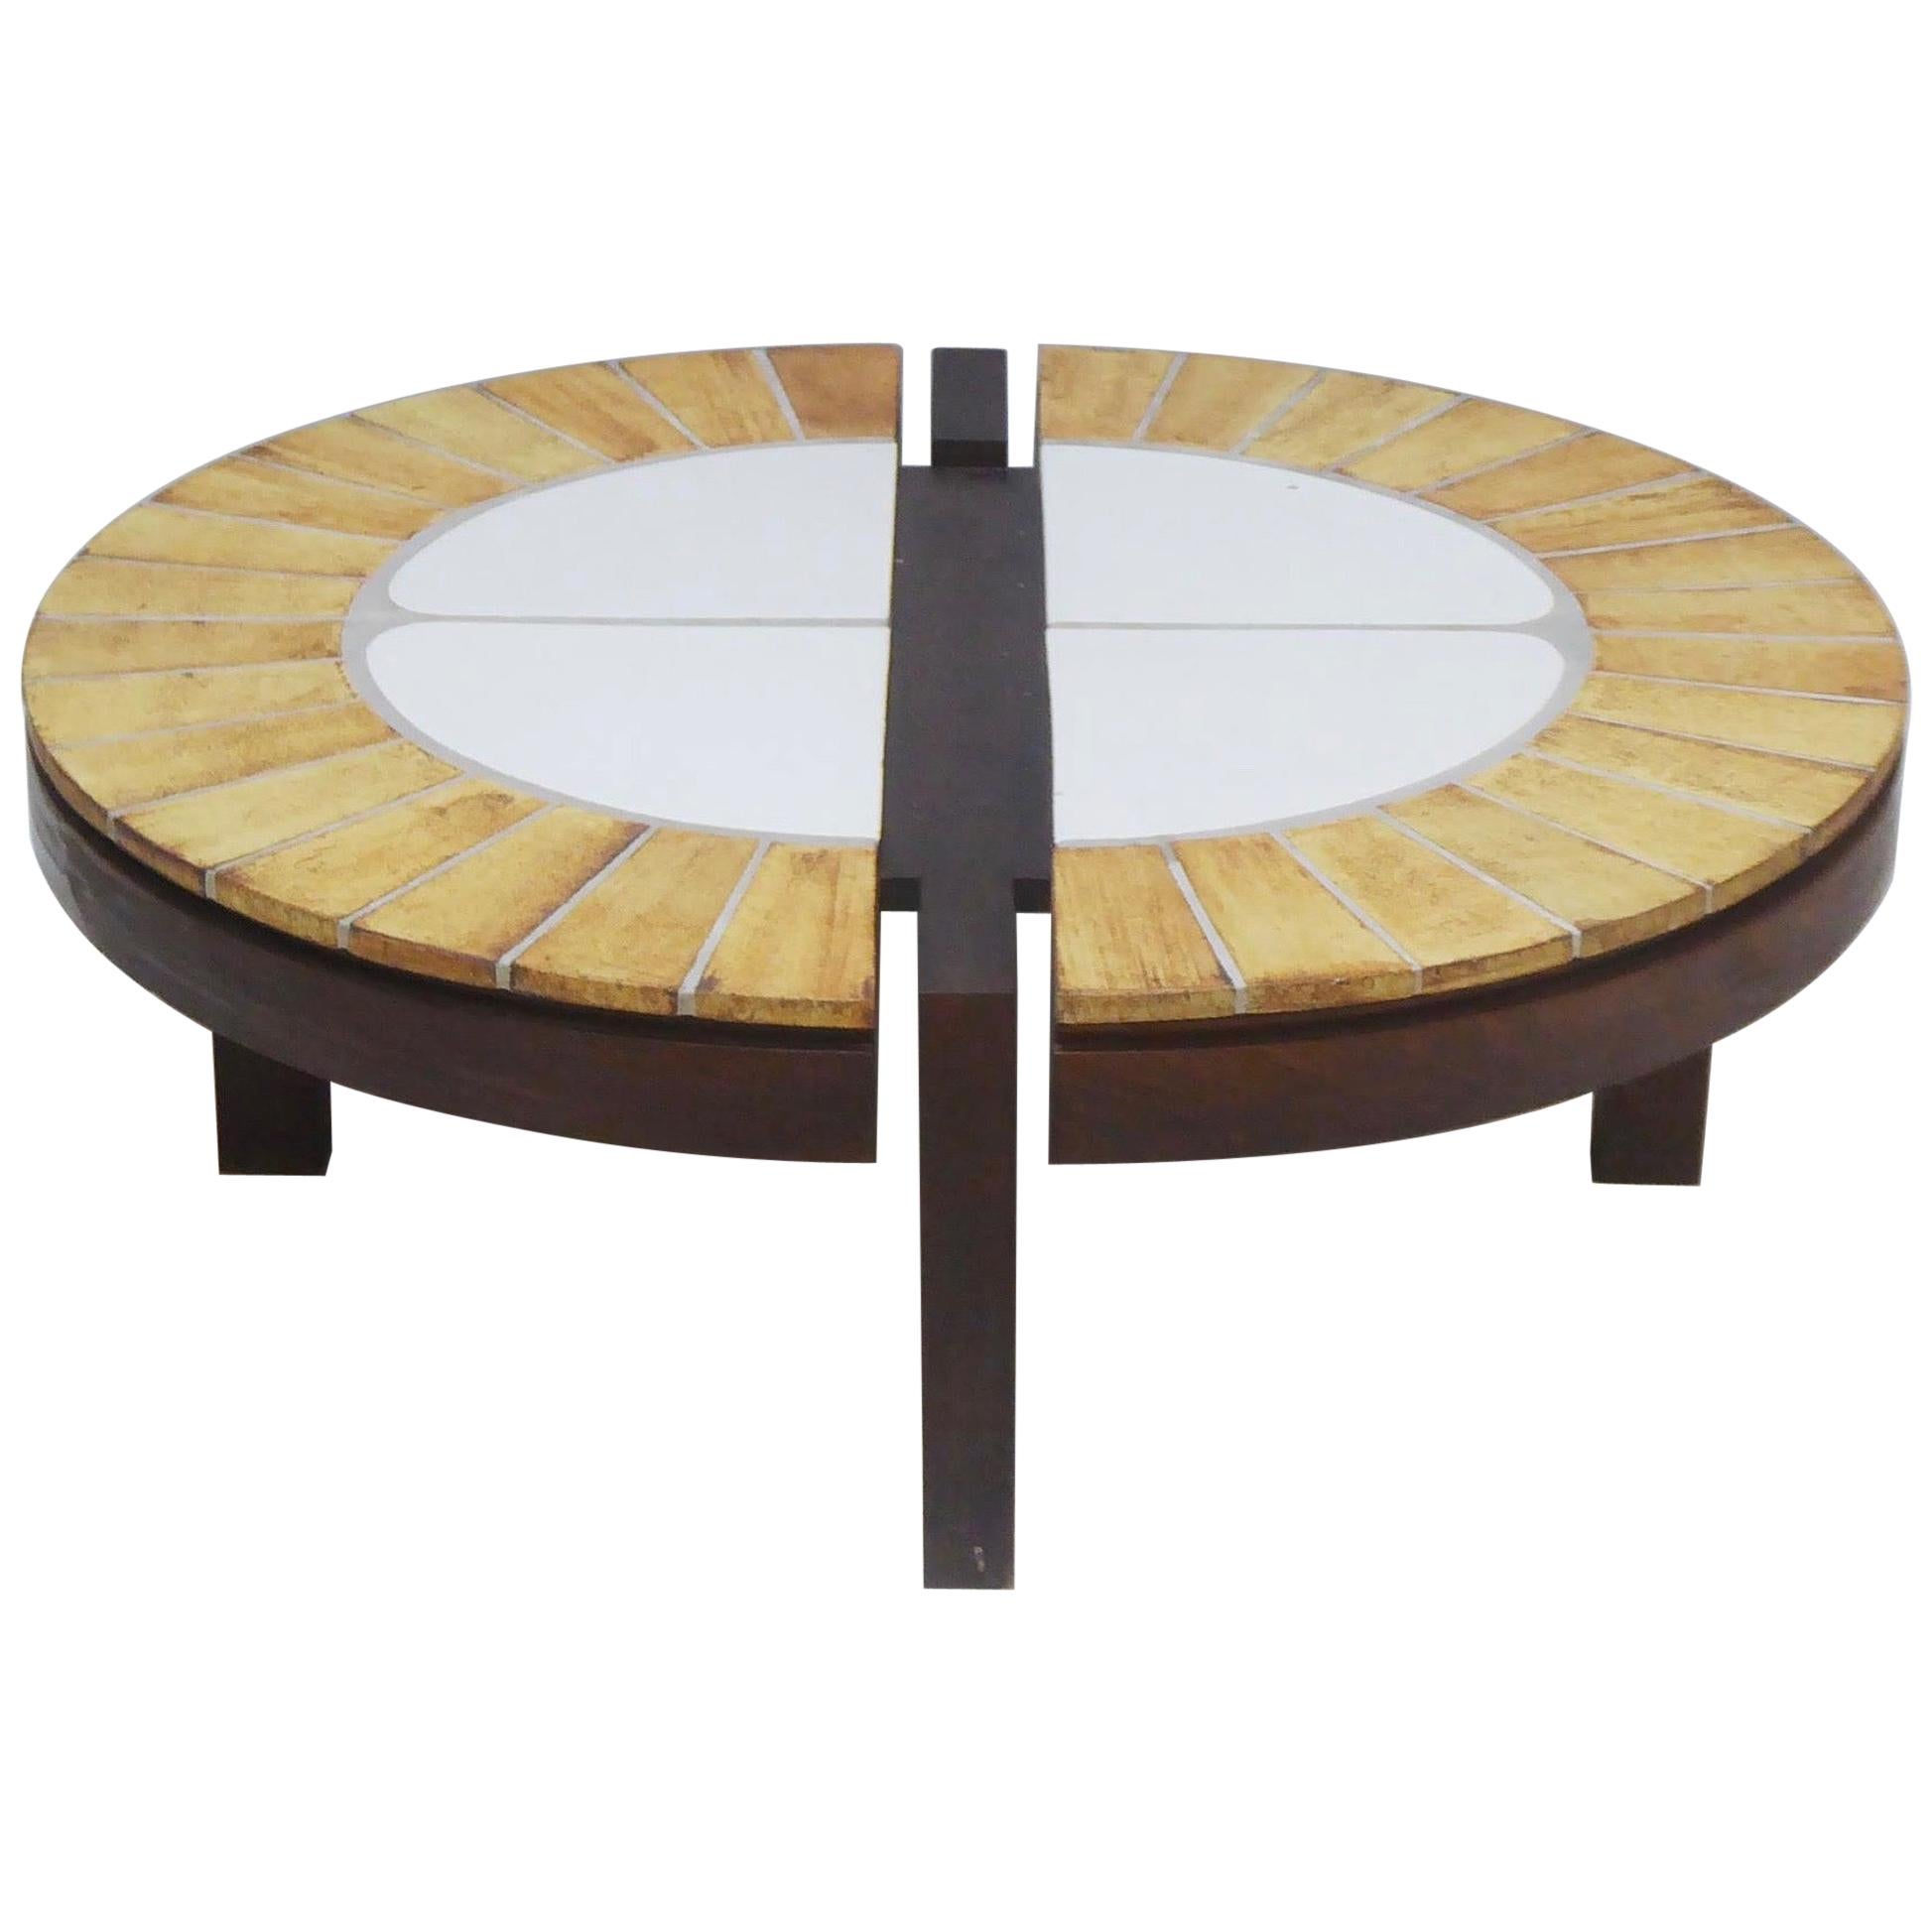 Roger Capron Coffee Table Oval, Ceramic and Oak, 1960